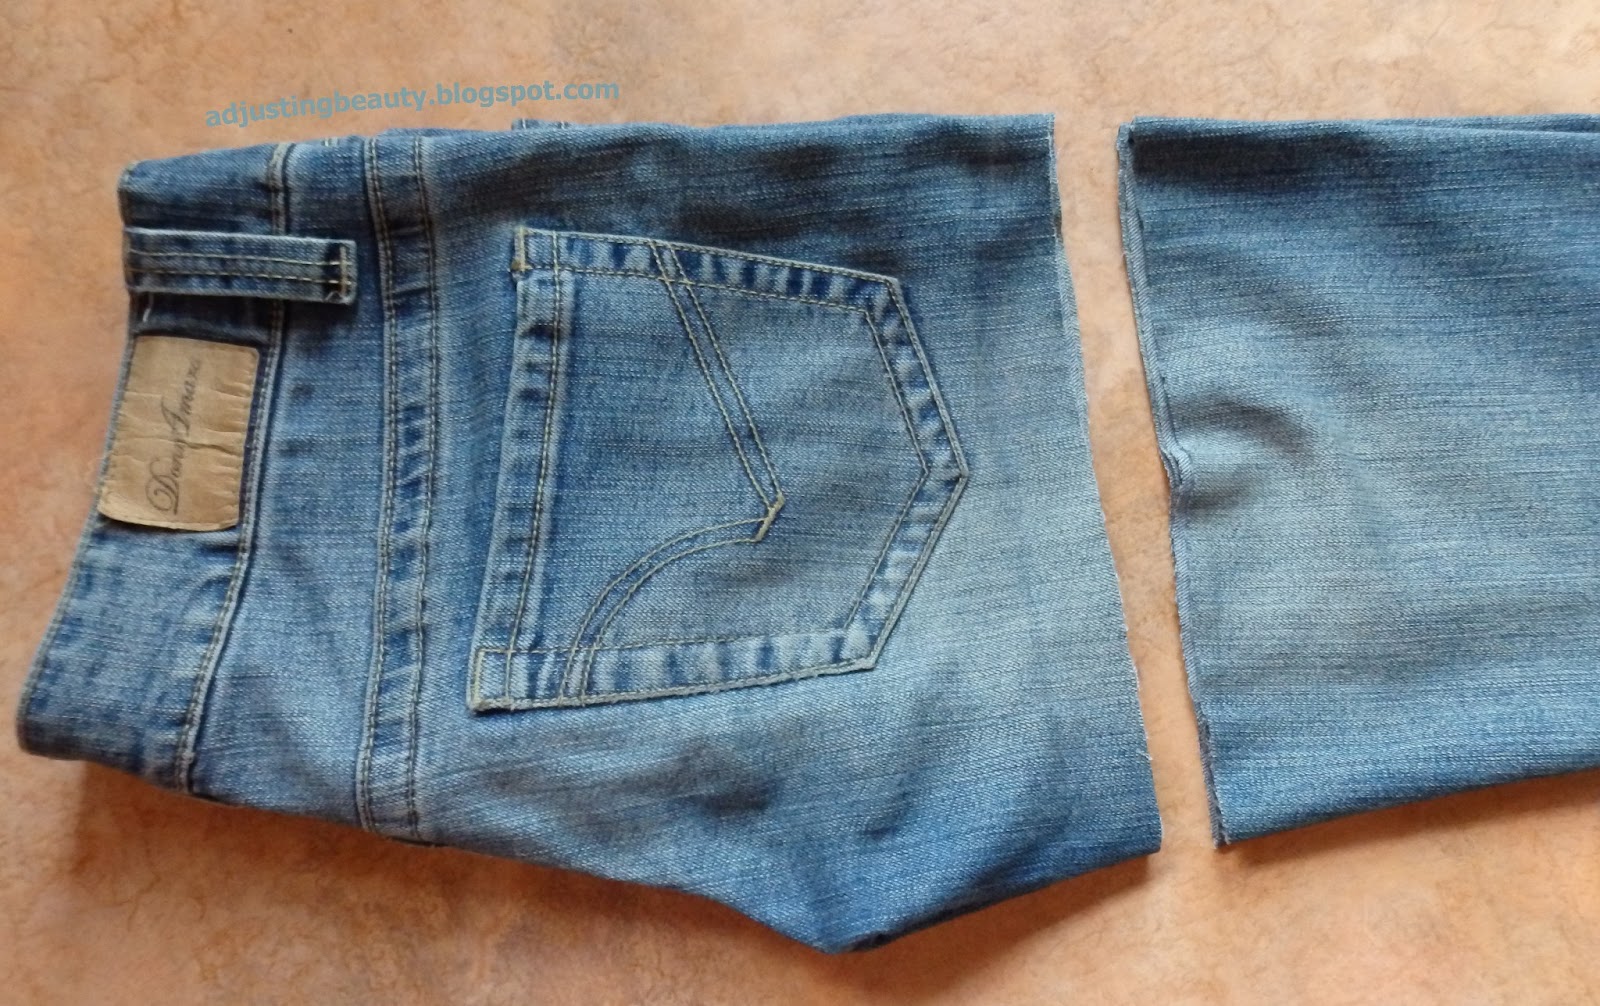 Recycling old jeans - Adjusting Beauty